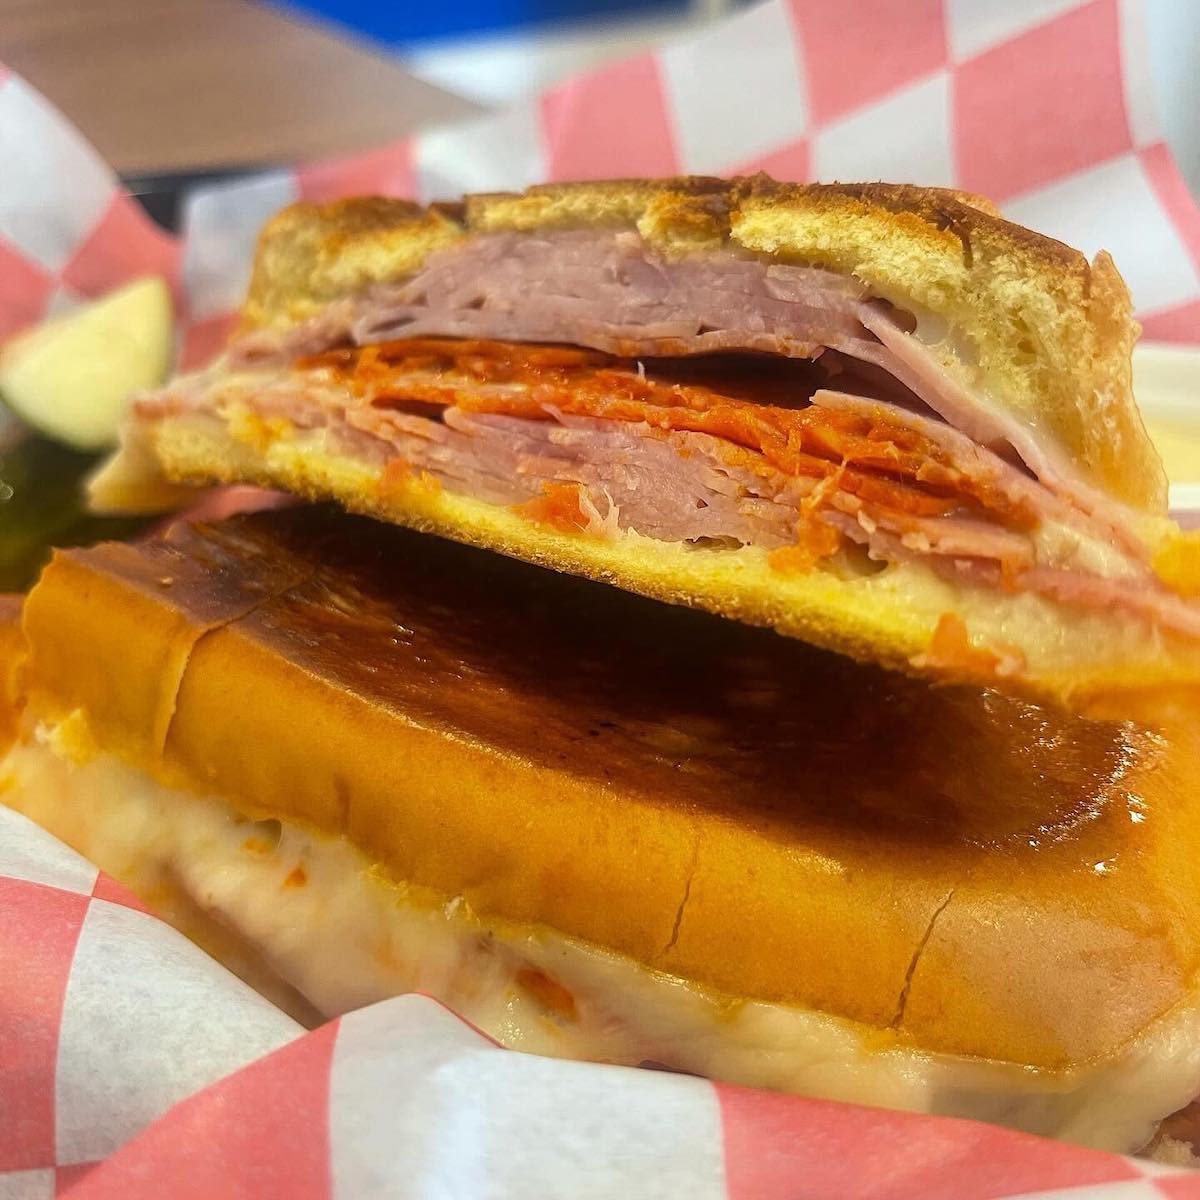 Don Quijote Medianoche Sandwich from Cuento Sandwiches in Doral, Florida